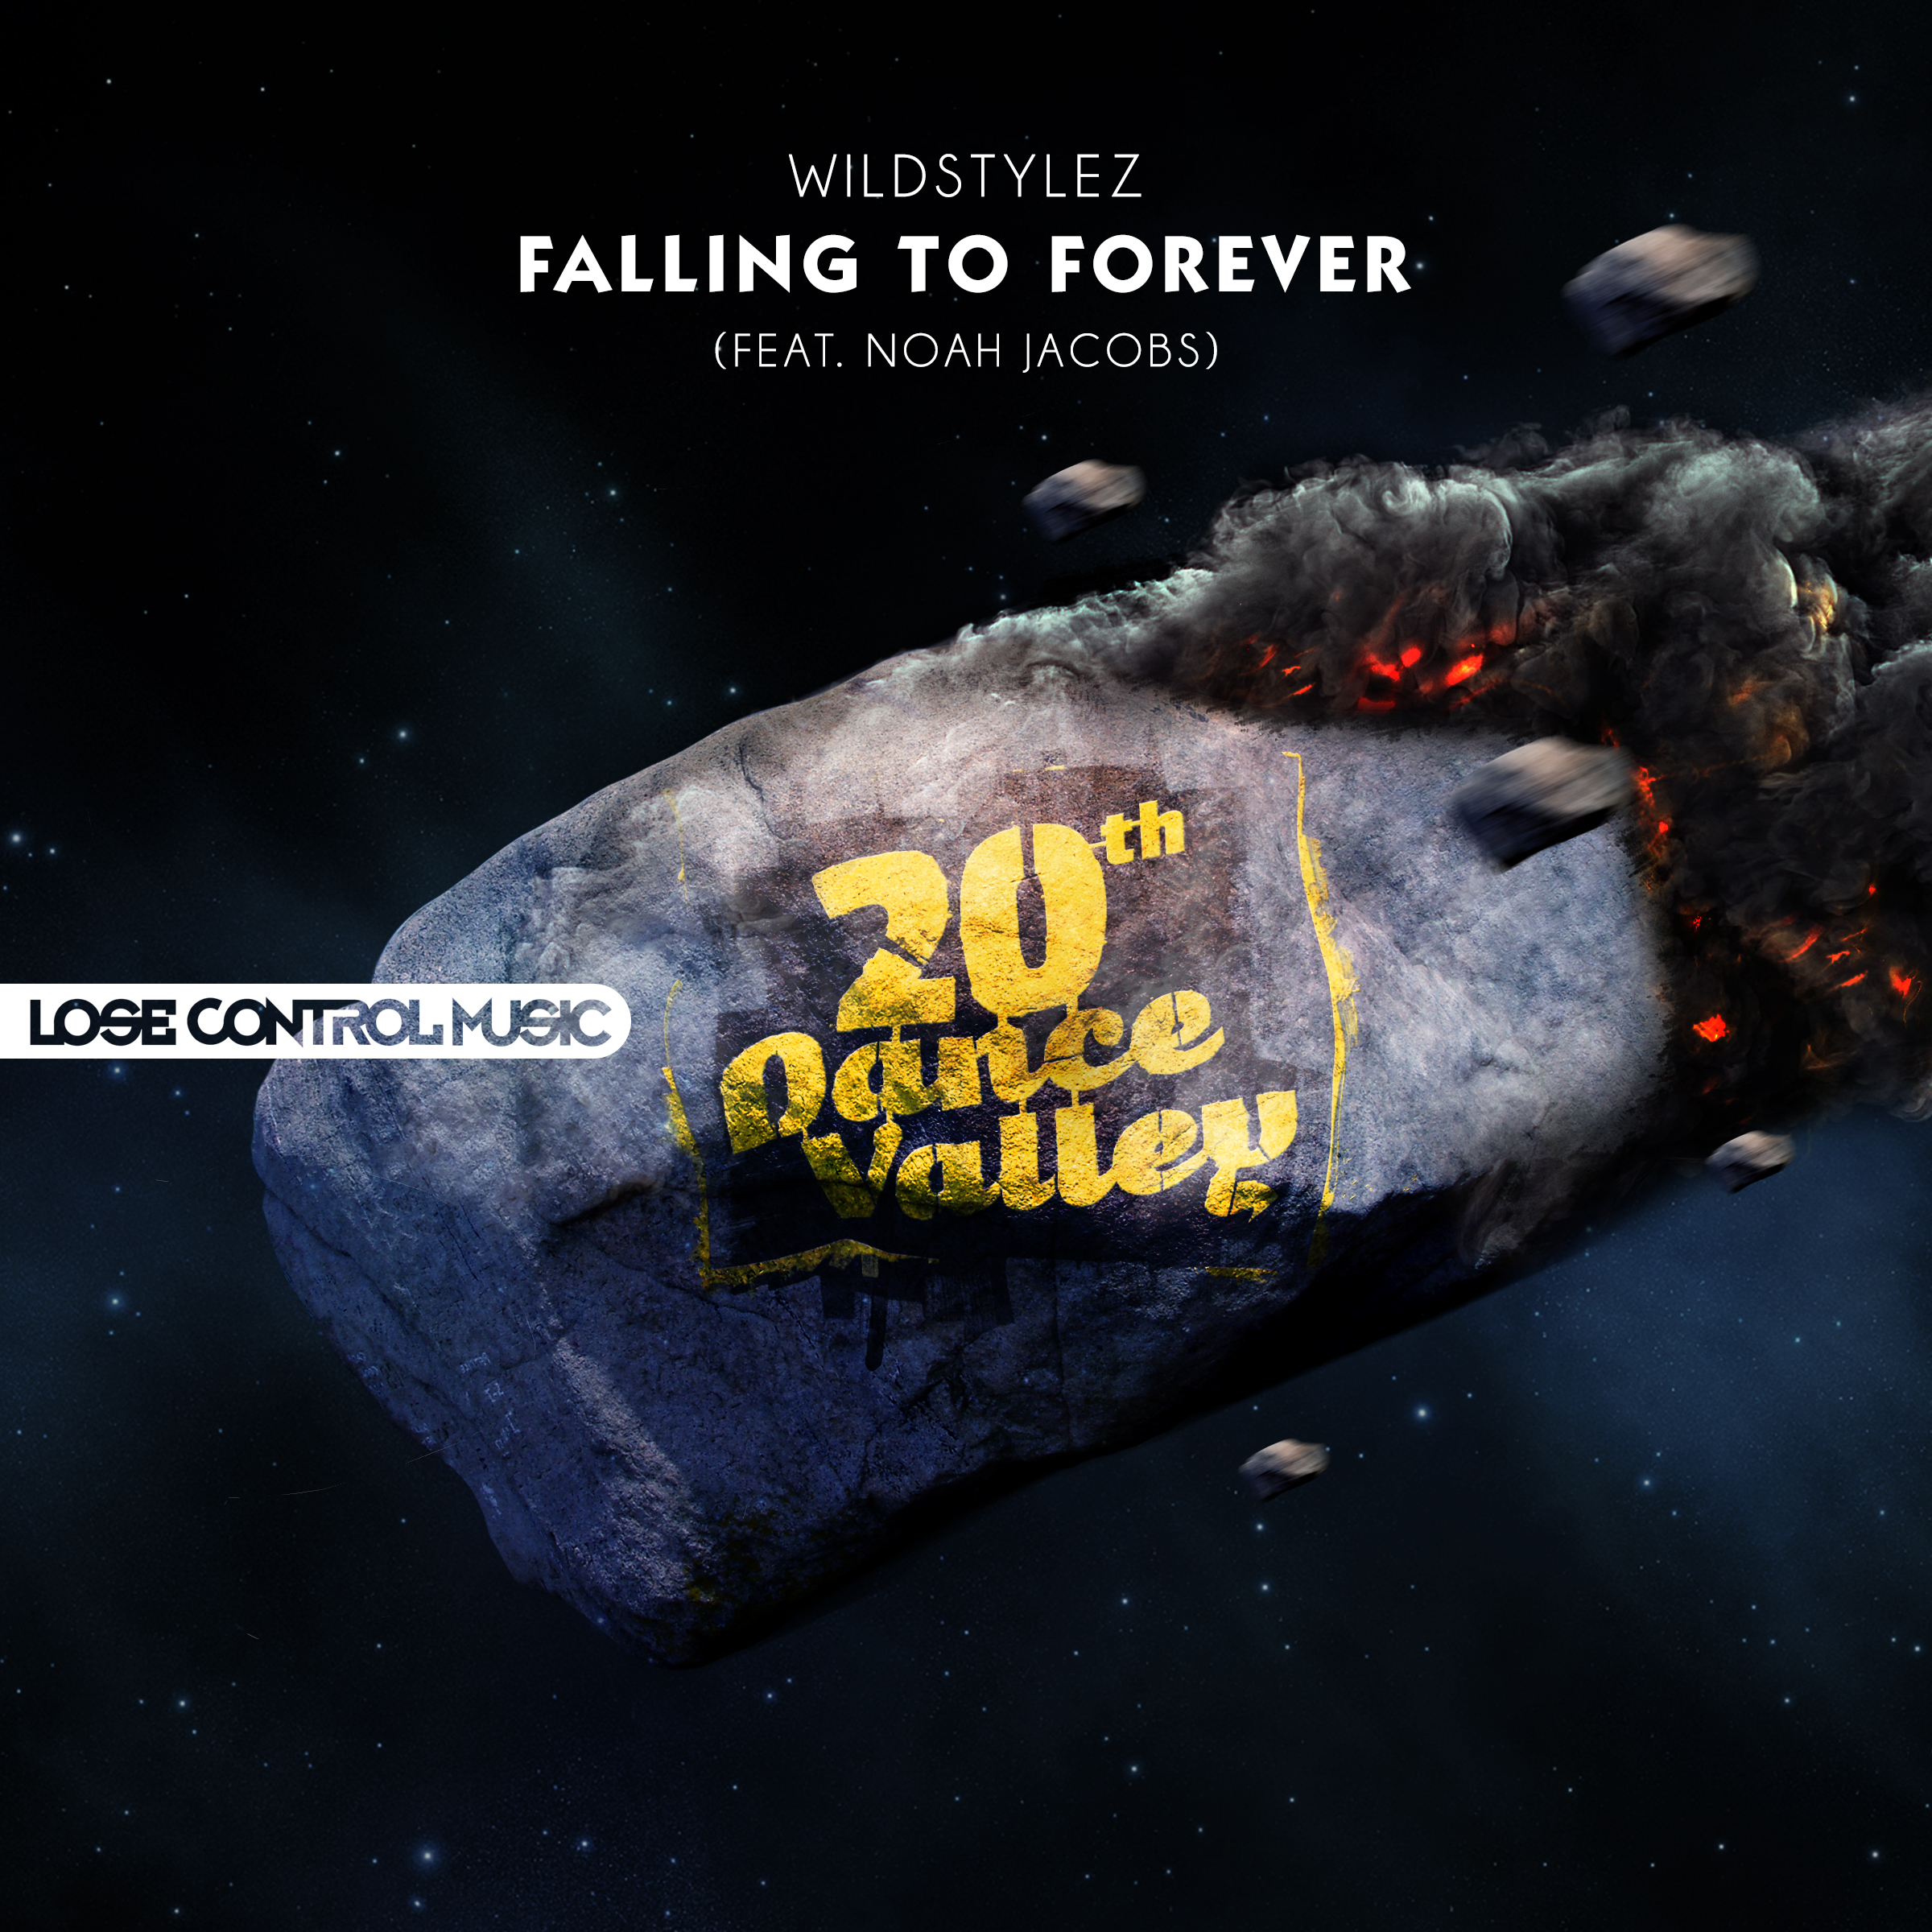 LCM008_Wildstylez – Falling To Forever (featuring Noah Jacobs)_Cover 2400x2400